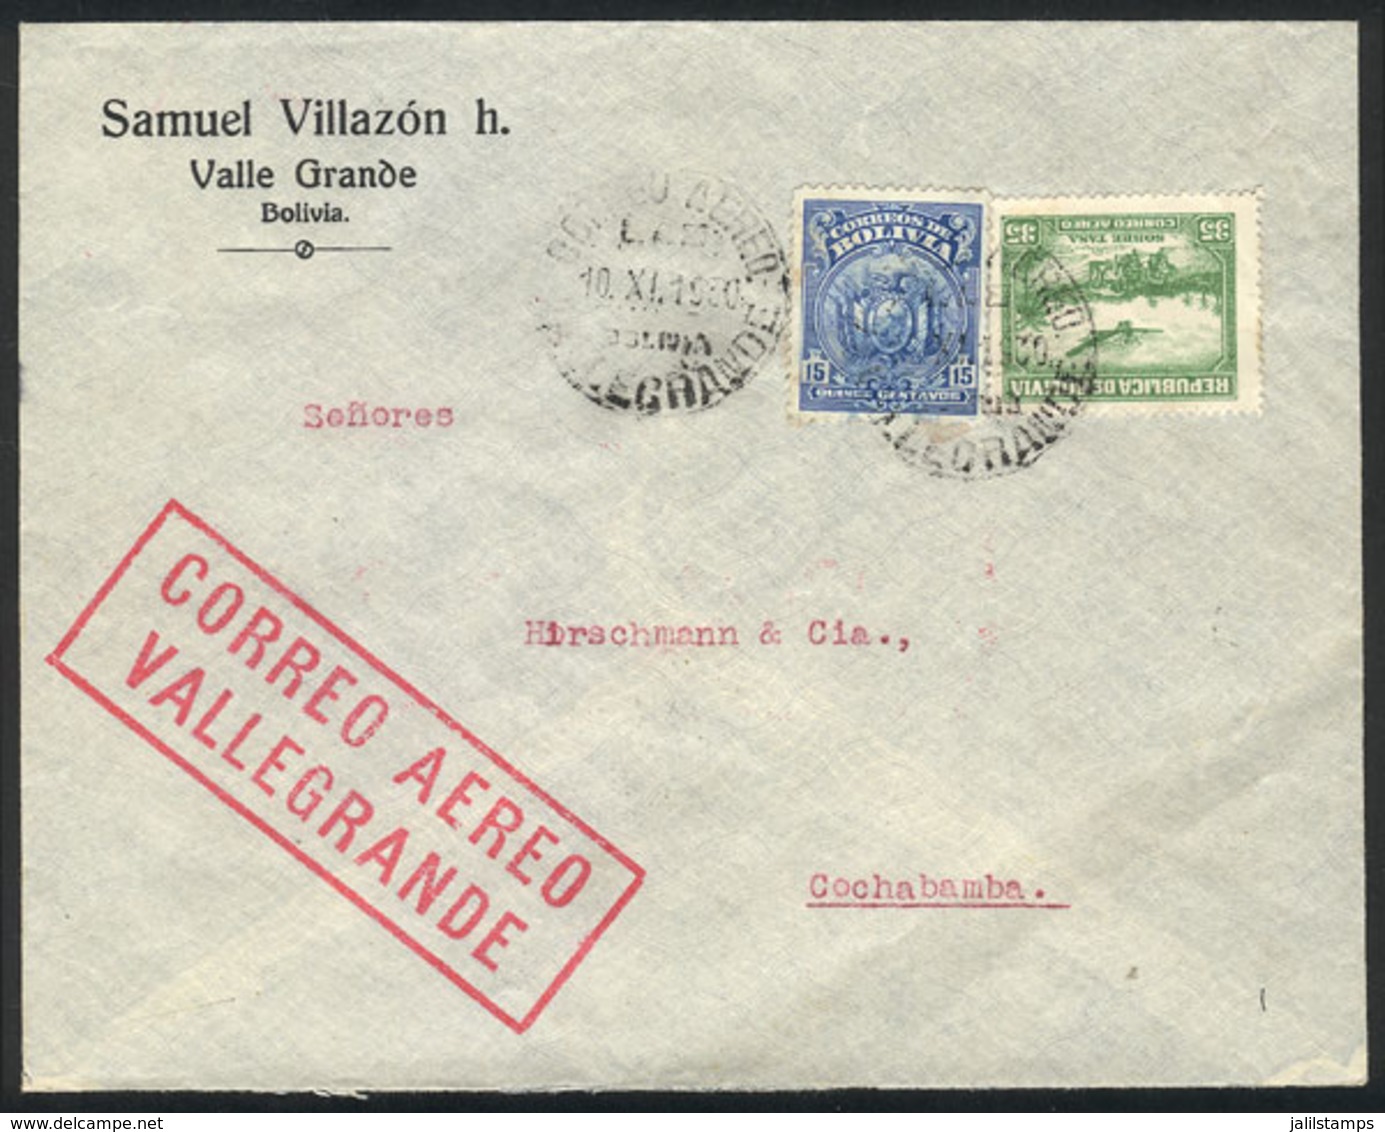 BOLIVIA: Airmail Cover Sent From Valle Grande To Cochabamba On 10/NO/1930 By LAB, Franked With 50c., With Arrival Backst - Bolivien